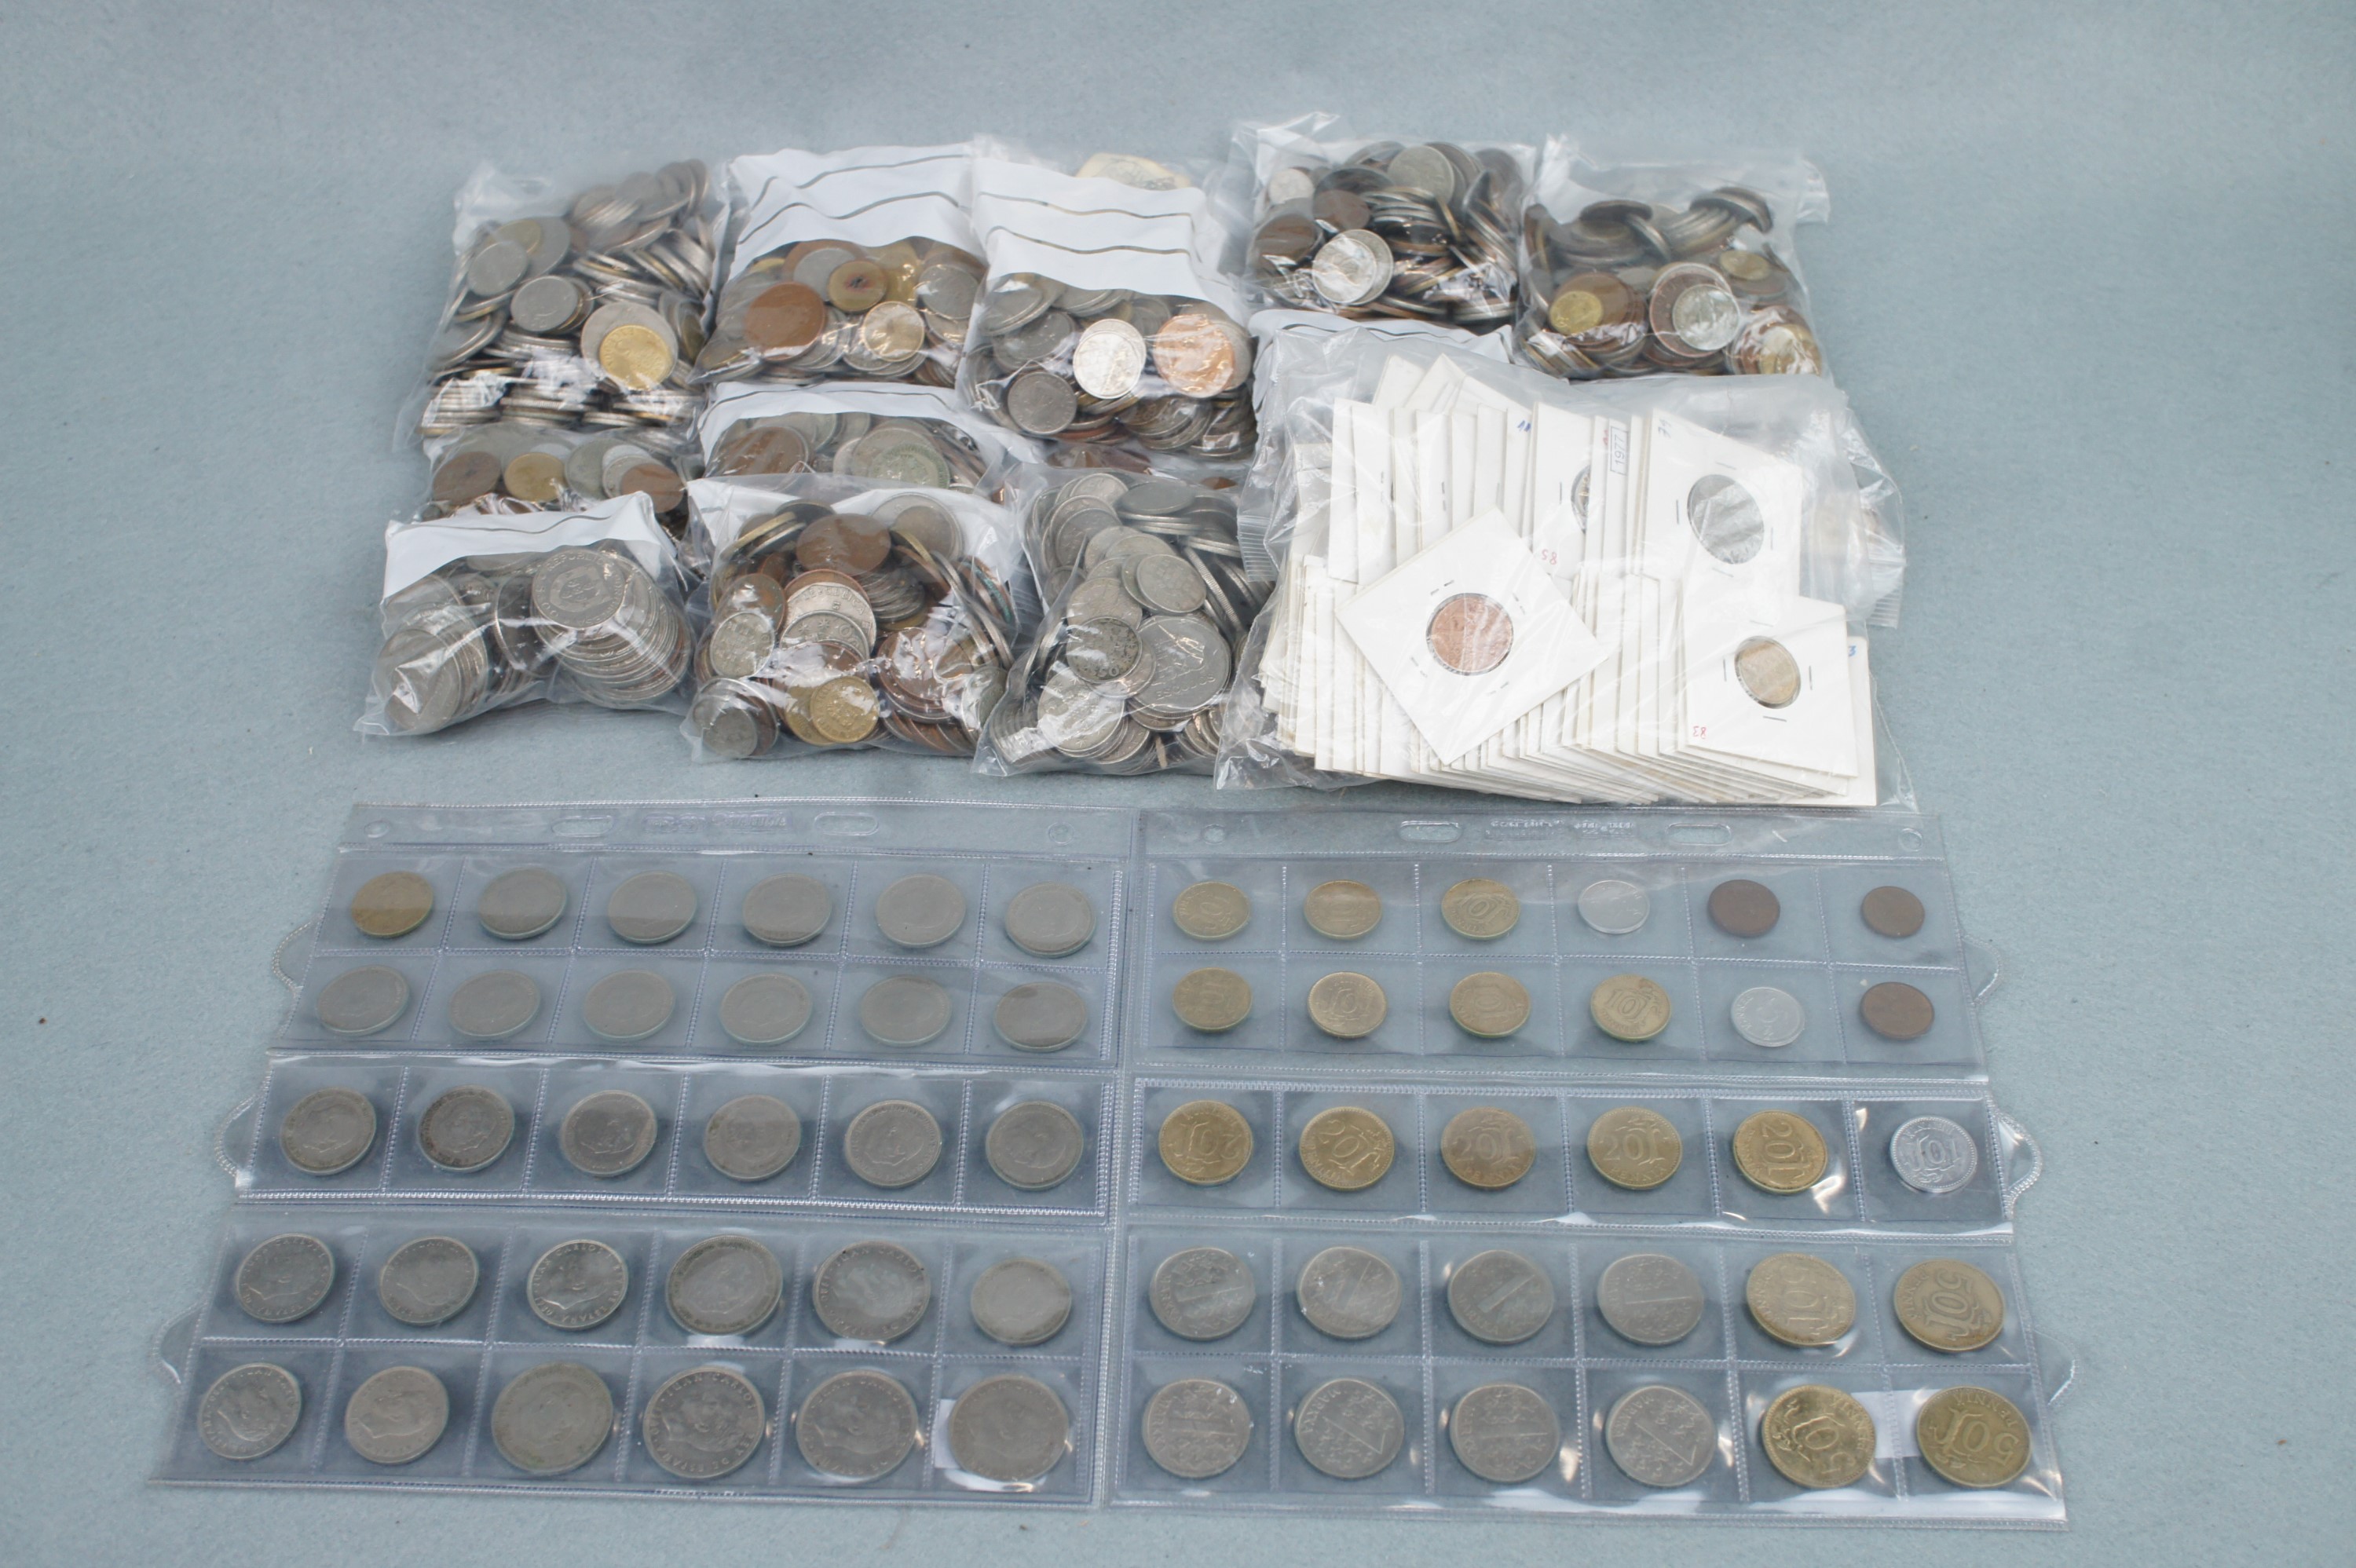 A large quantity of Portuguese and other coins